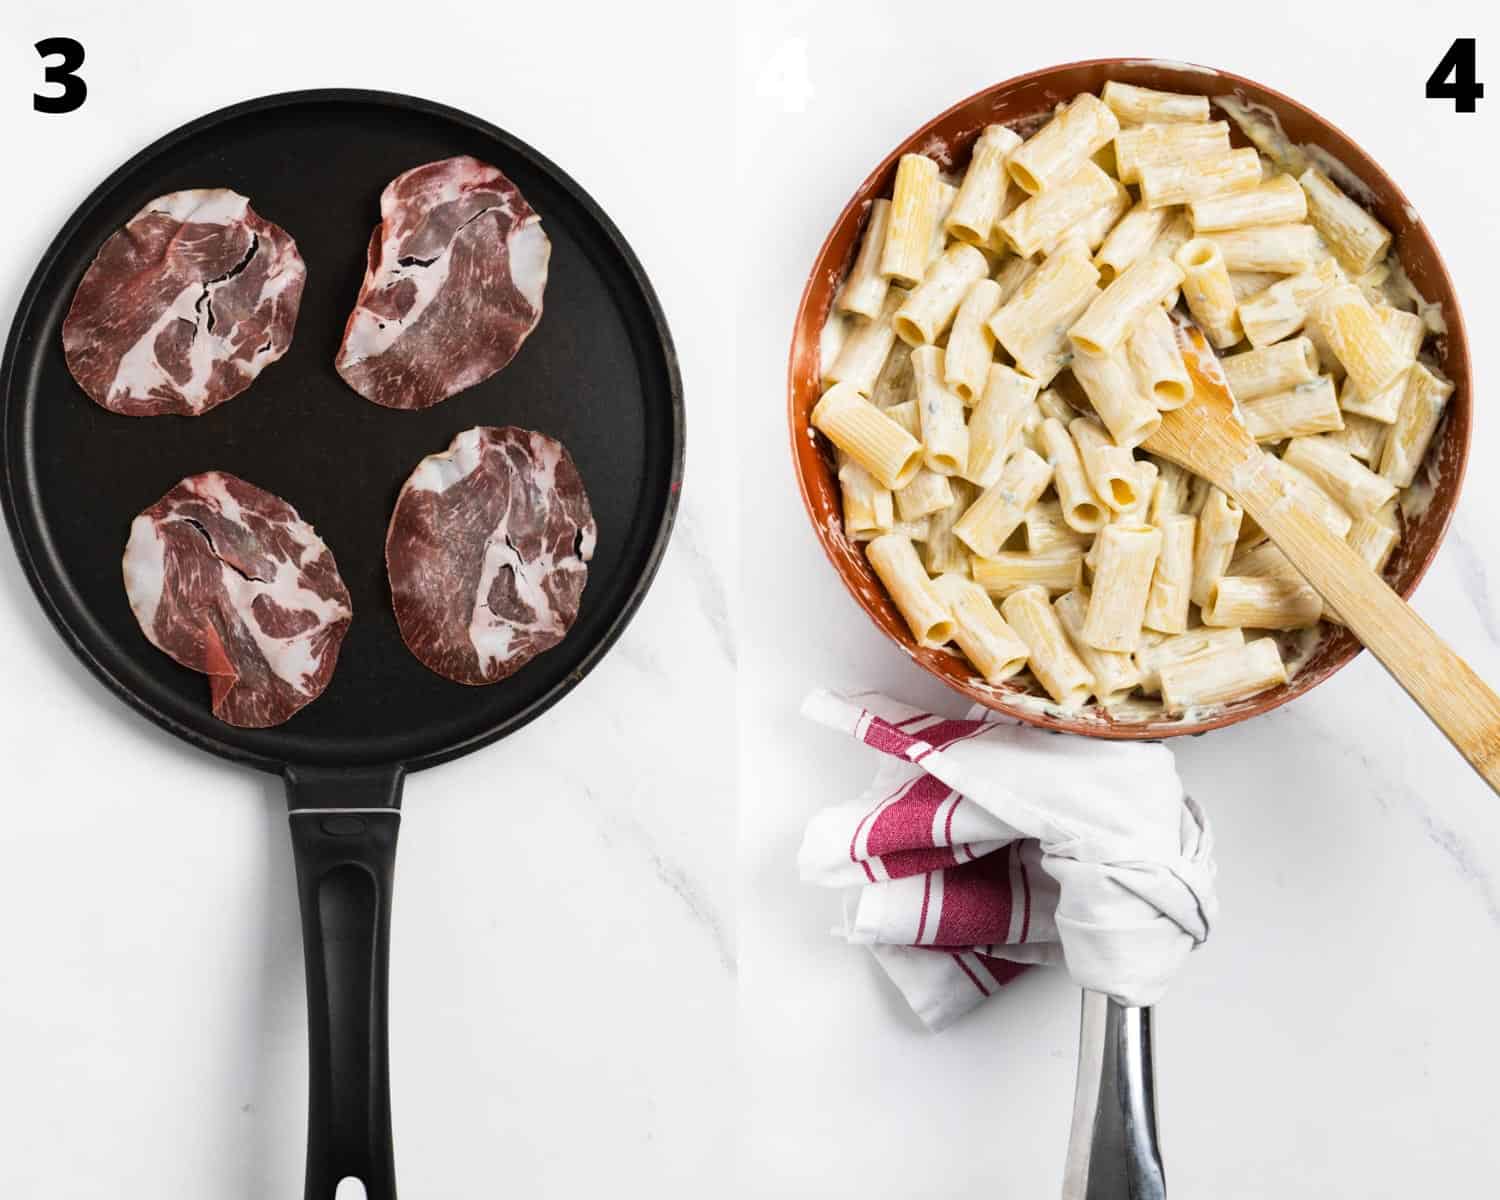 collage of 2 pictures: on the left a black pan with 4 slices of coppa and on the right pasta tossed in a creamy sauce.